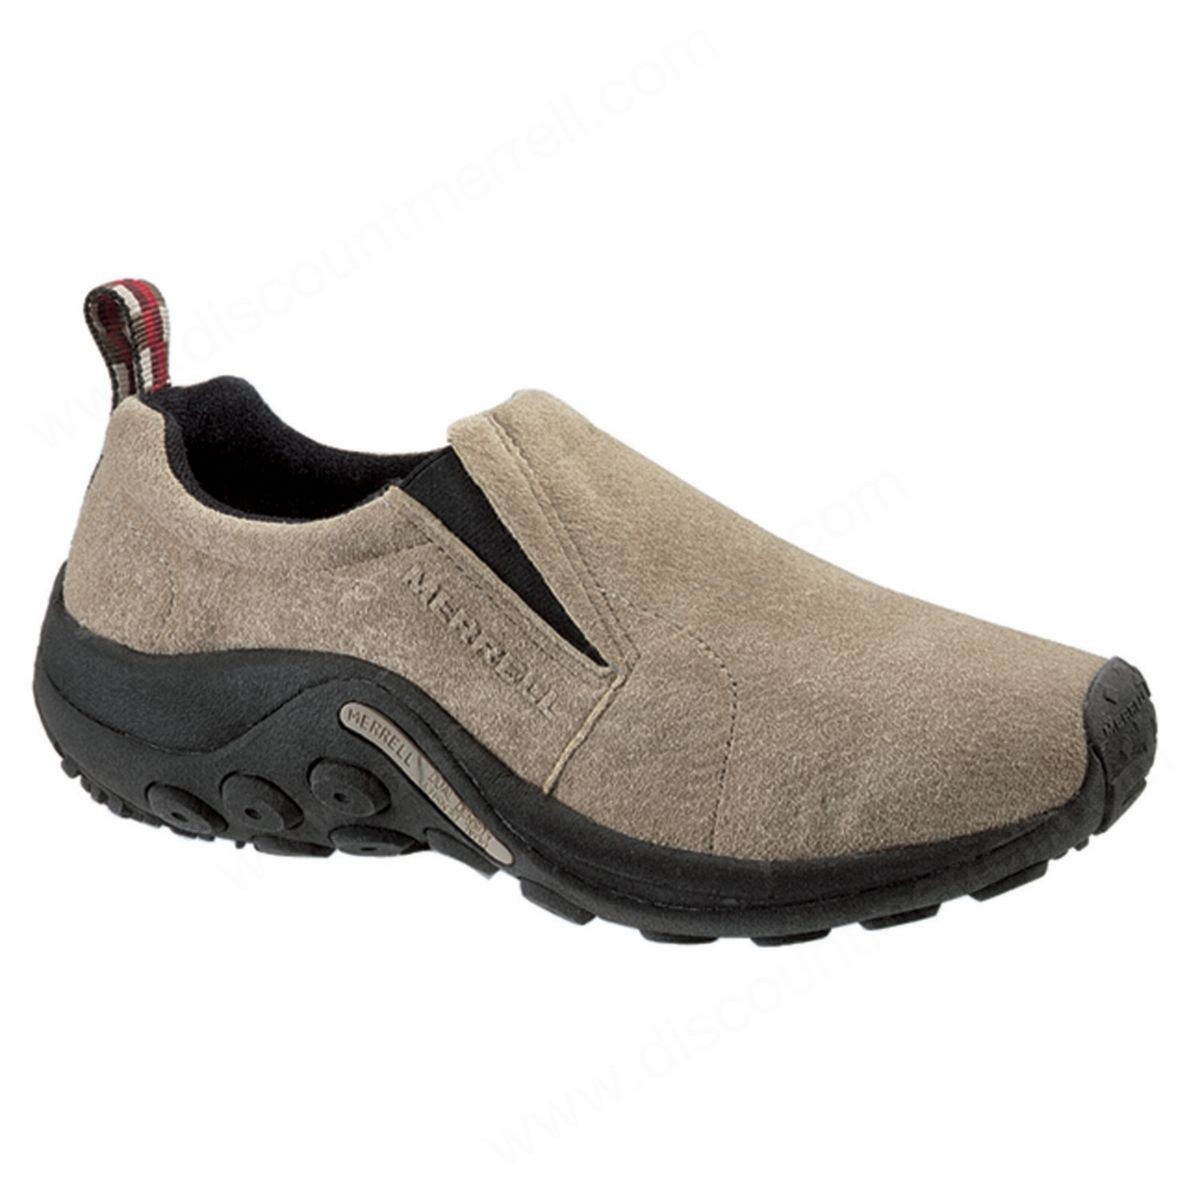 Merrell Woman's Jungle Moc Taupe - -0